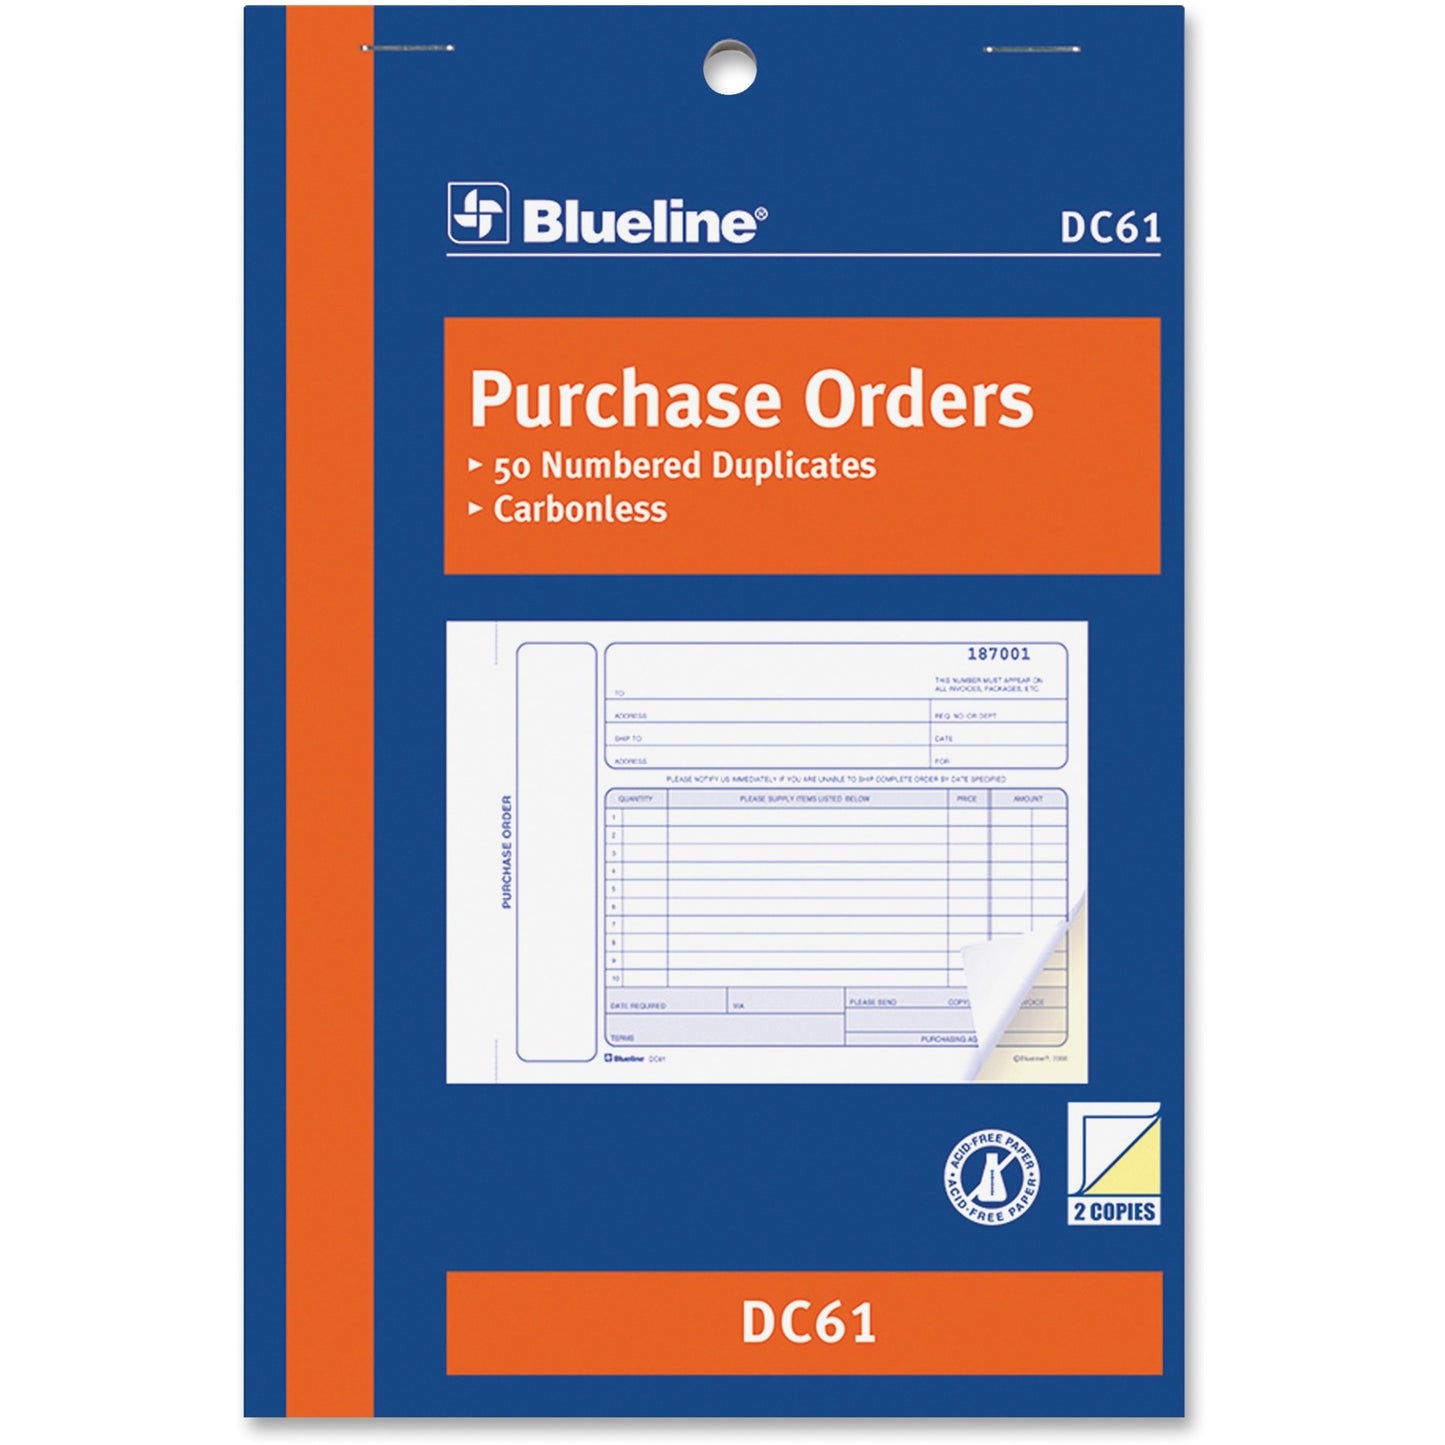 Blueline Purchase Order Form Book